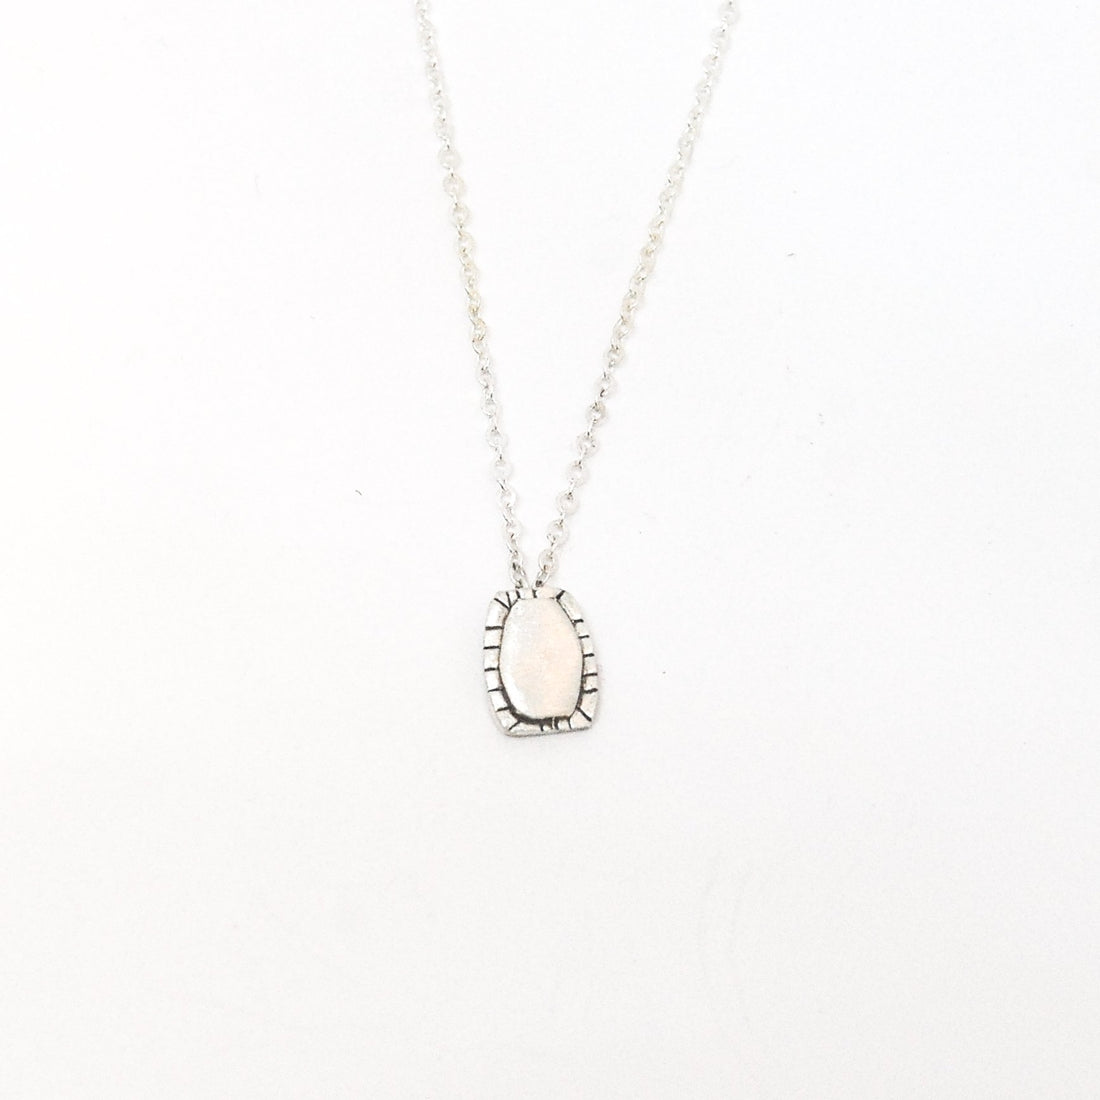 Petite Aytan Necklace - plain, personalized or with stone